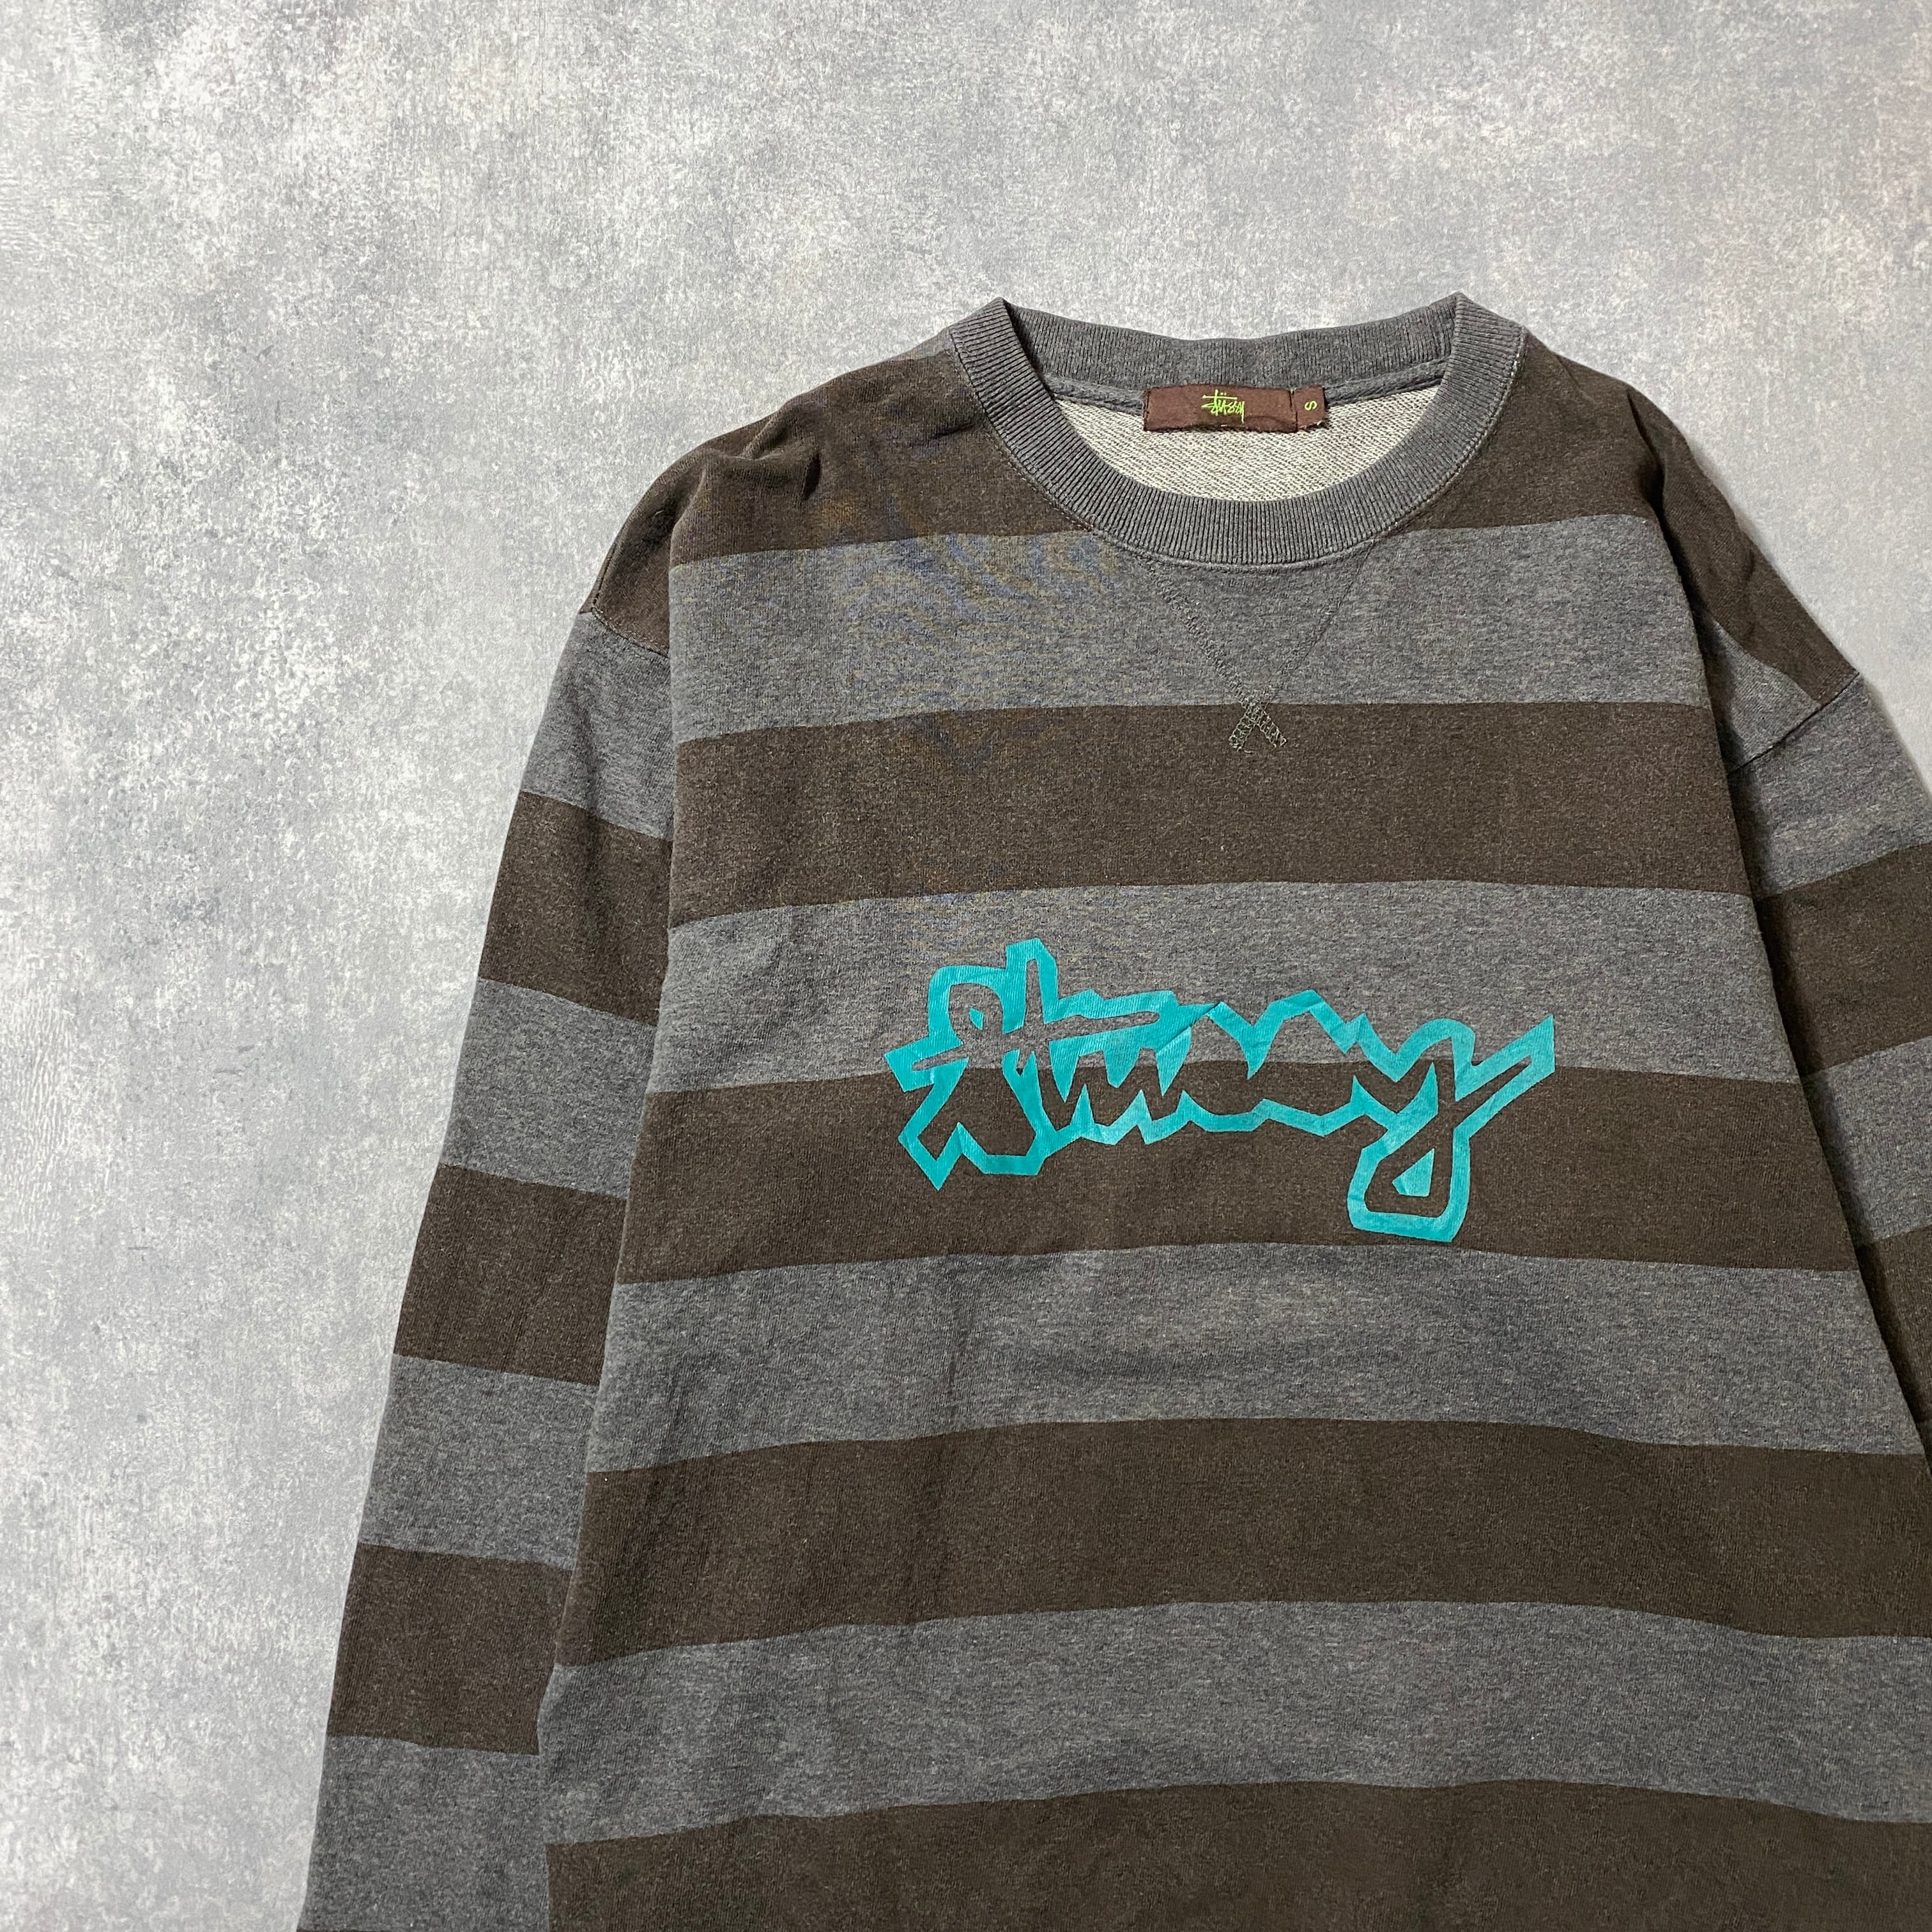 90's old stussy ステューシー ボーダー プリントロゴ スウェット 